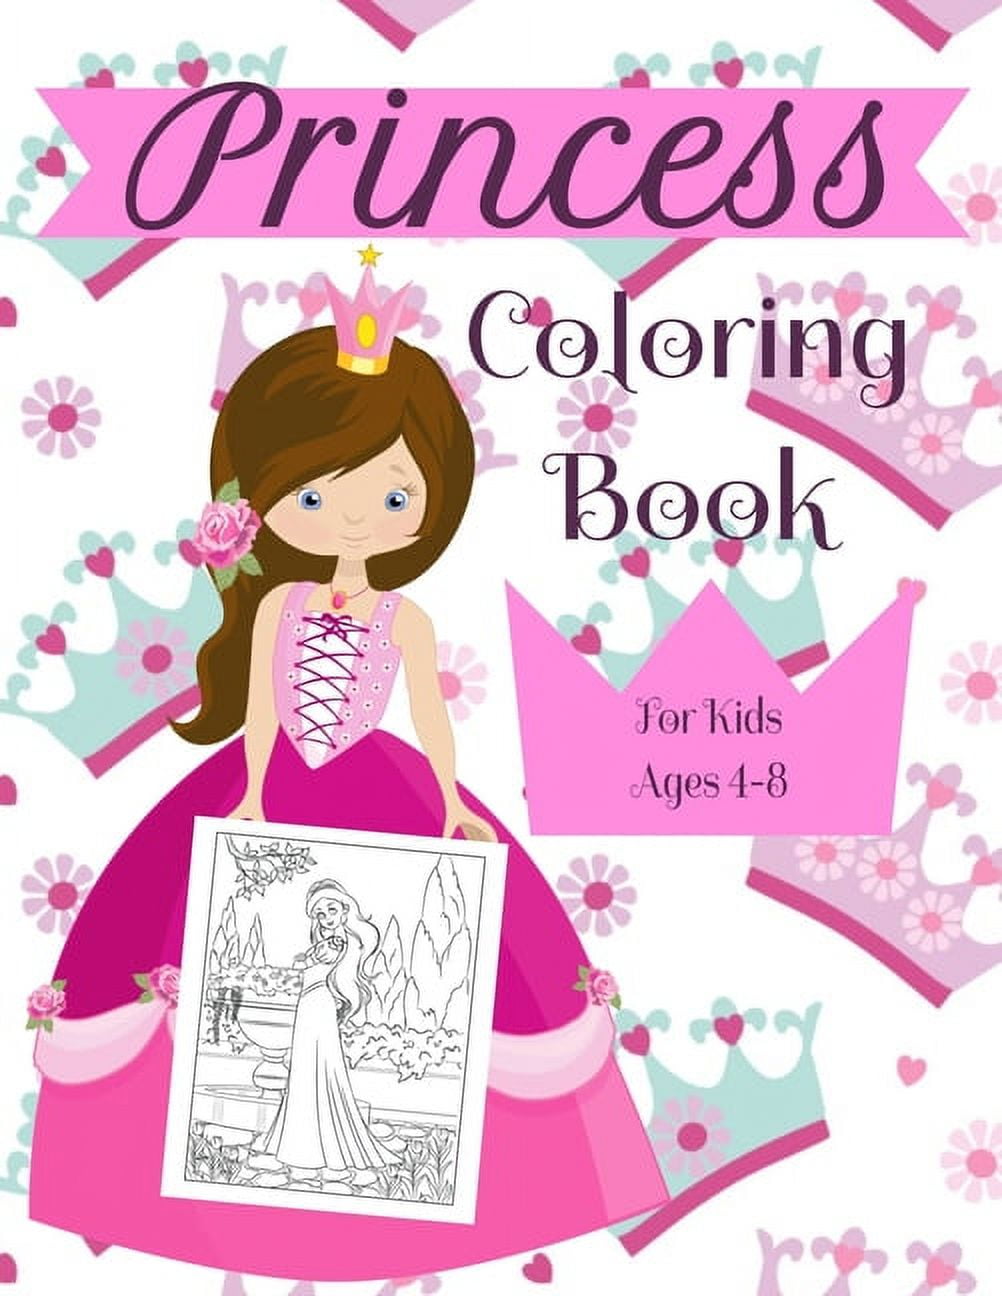 Paper Doll - Color, Cut, Play Little Princesses of the Worlds. Coloring  Book for Kids: Princess Coloring Book for Girls ages 4-8, Preschoolers,  Kinder (Paperback)